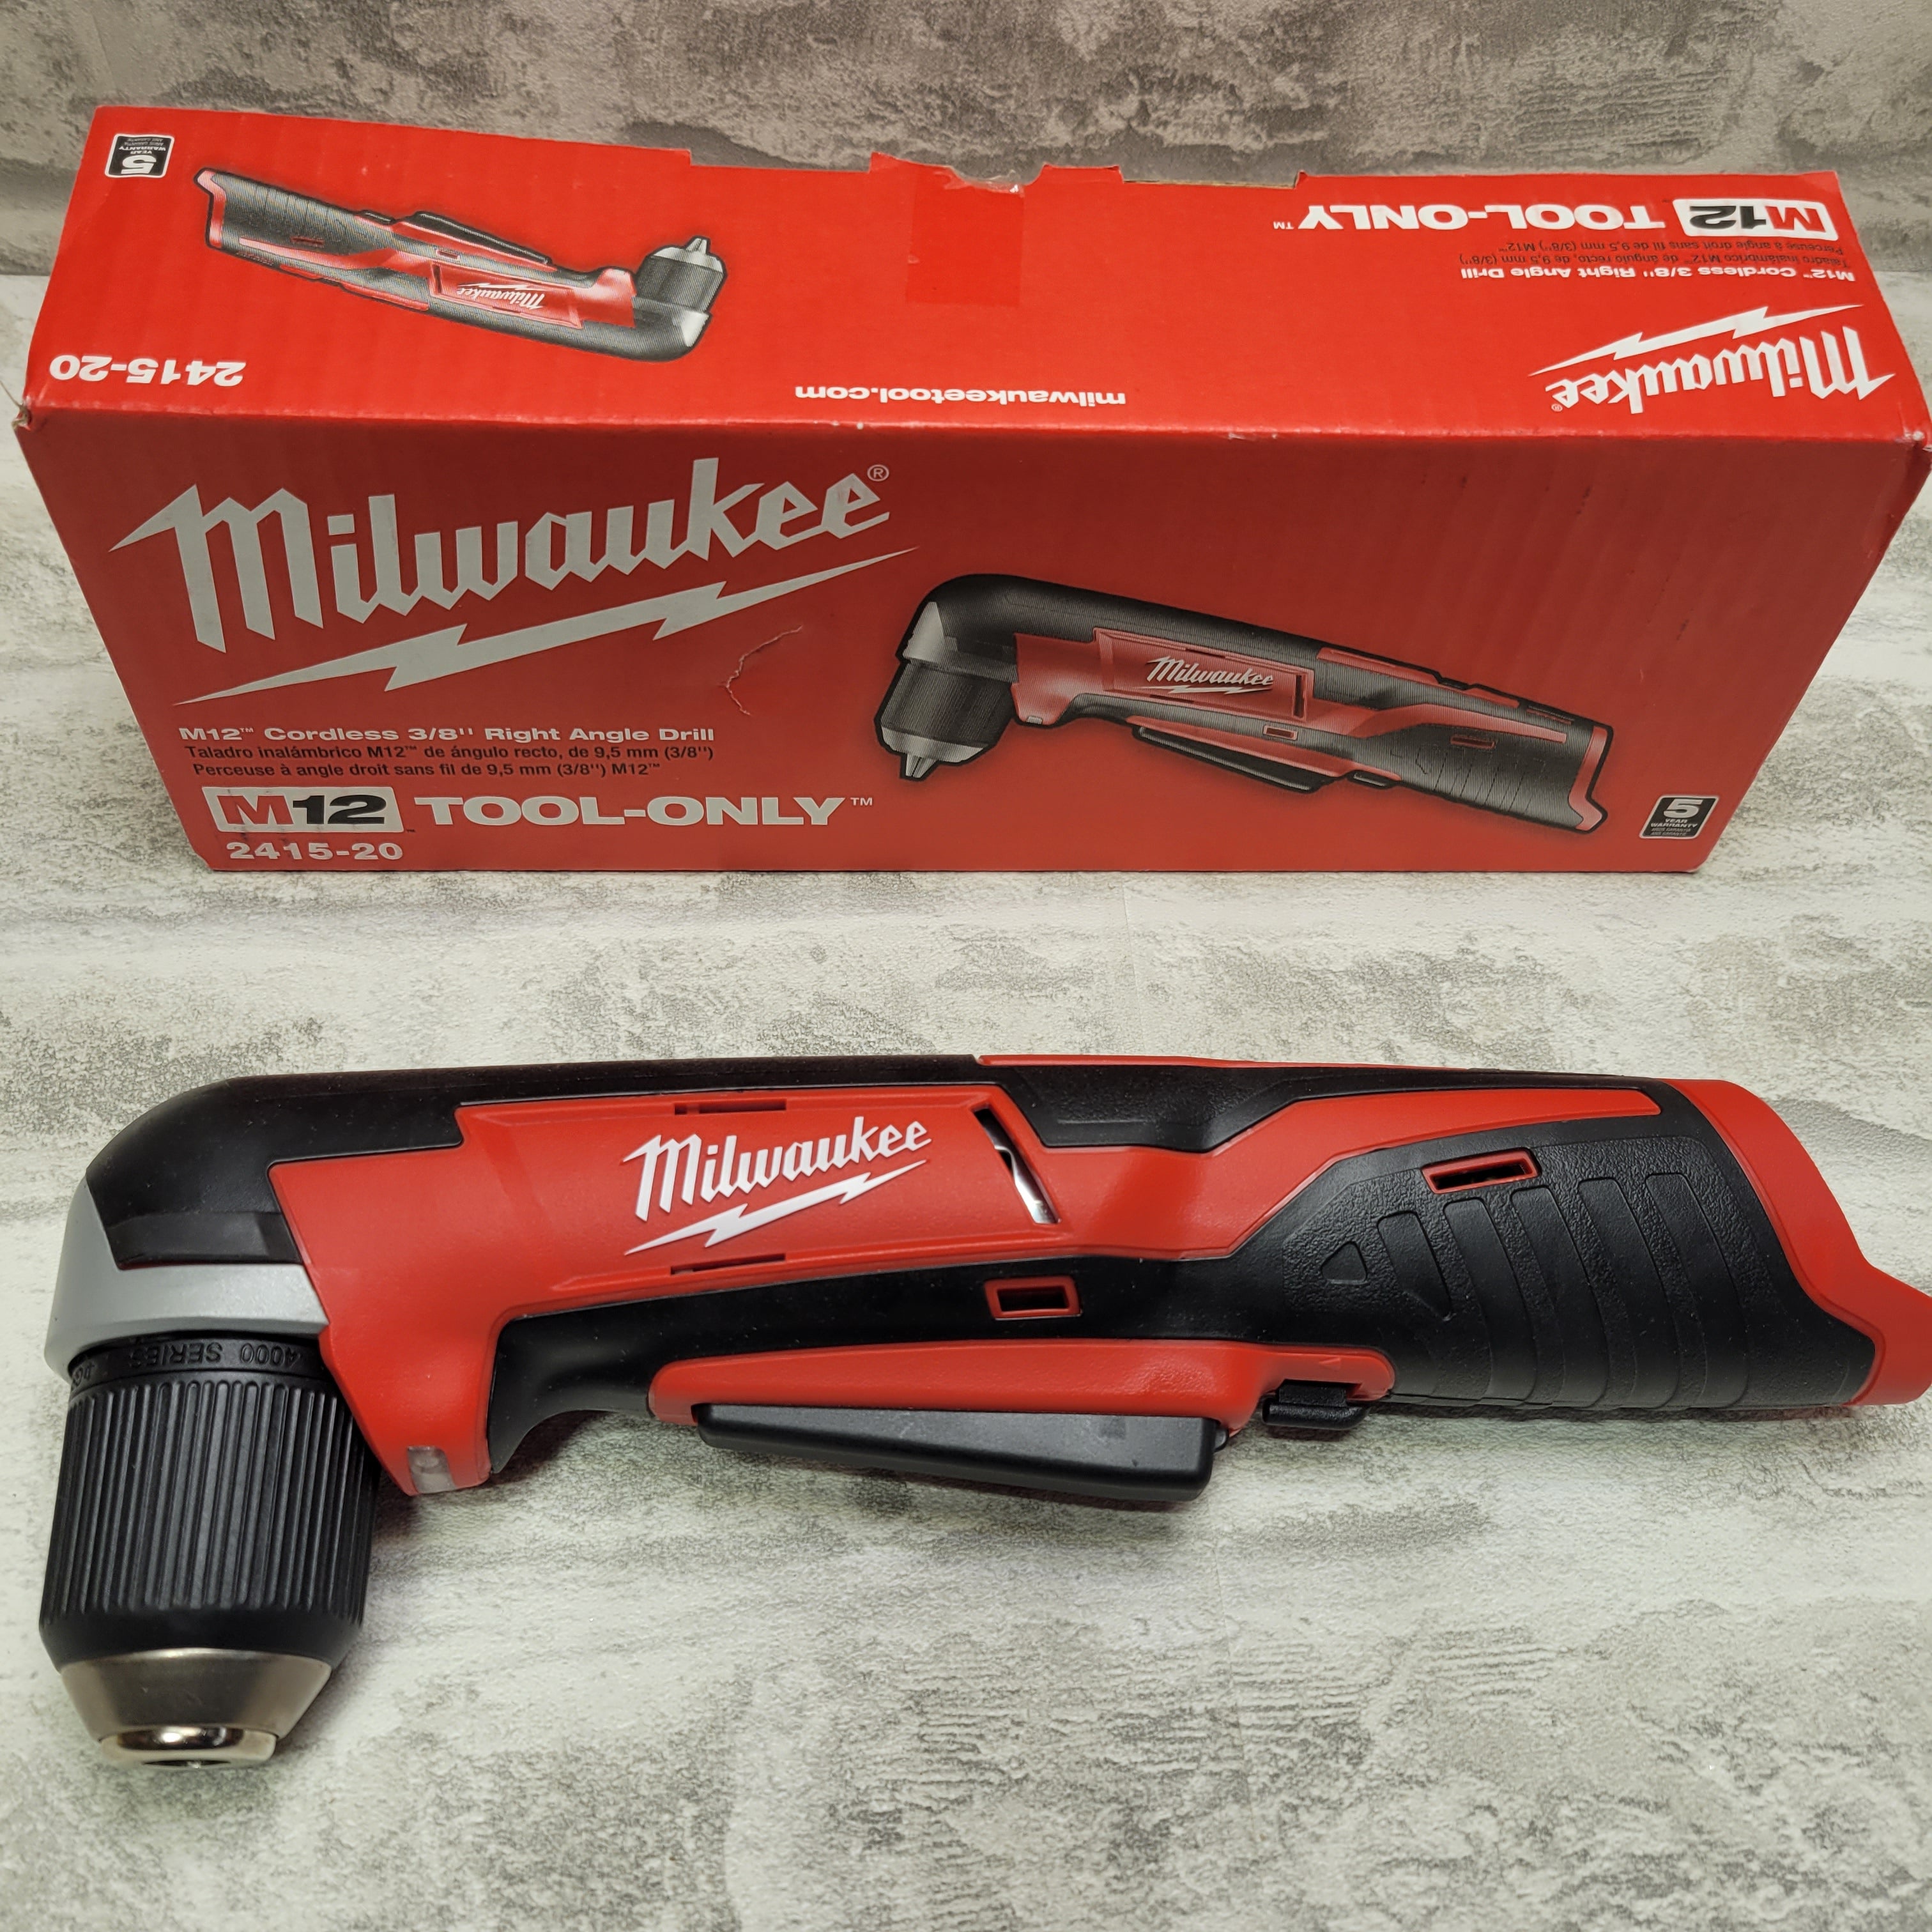 Milwaukee 2415-20 12-Volt Lithium-Ion Cordless Right Angle Drill 3/4